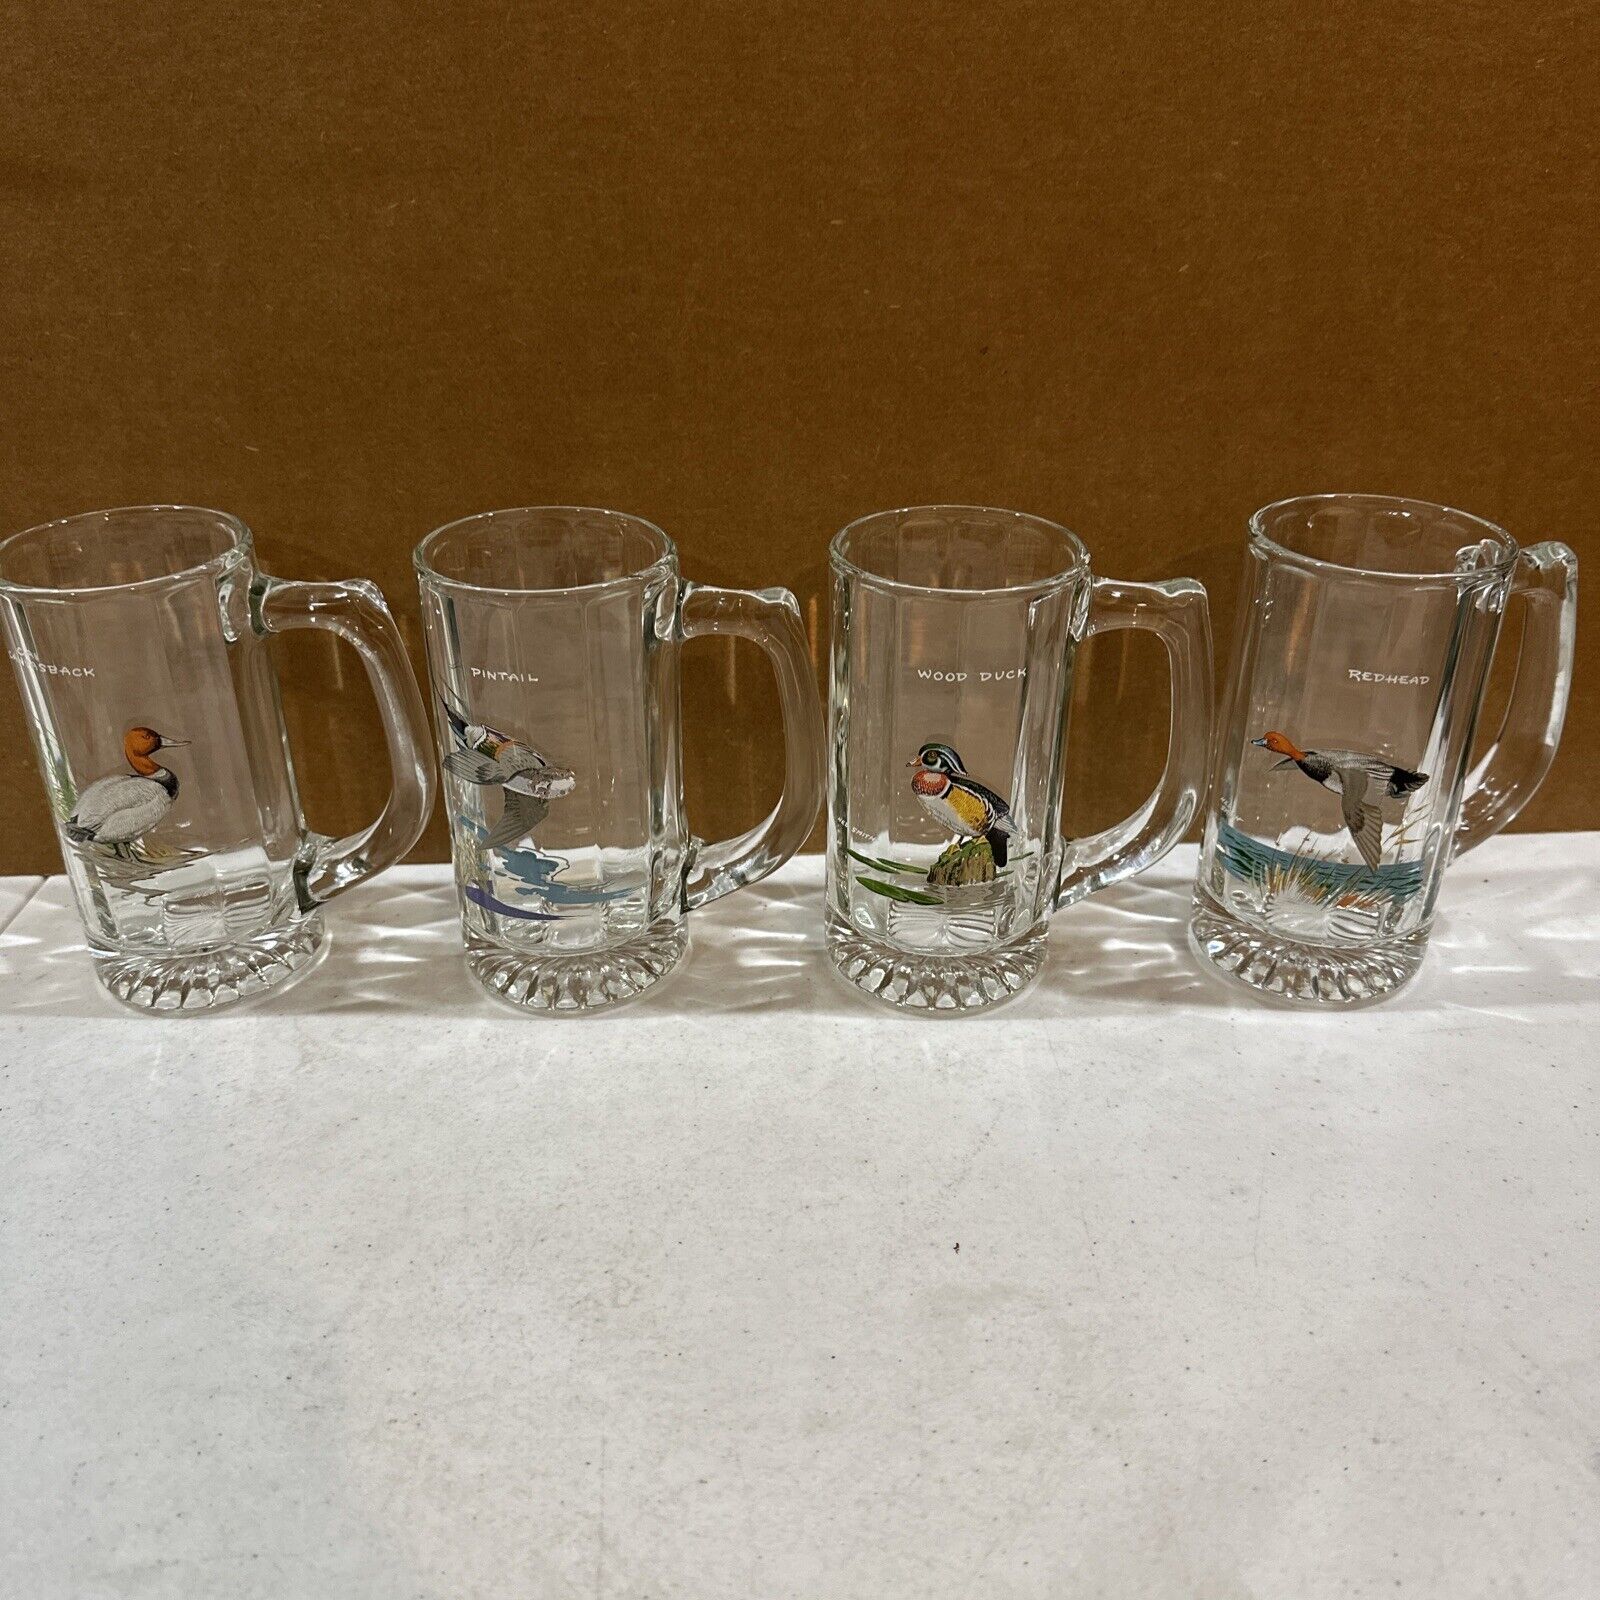 Ned Smith Glass Beer Mugs Wild Bird Duck 5.5” Tall Set of 4 Vintage Painted